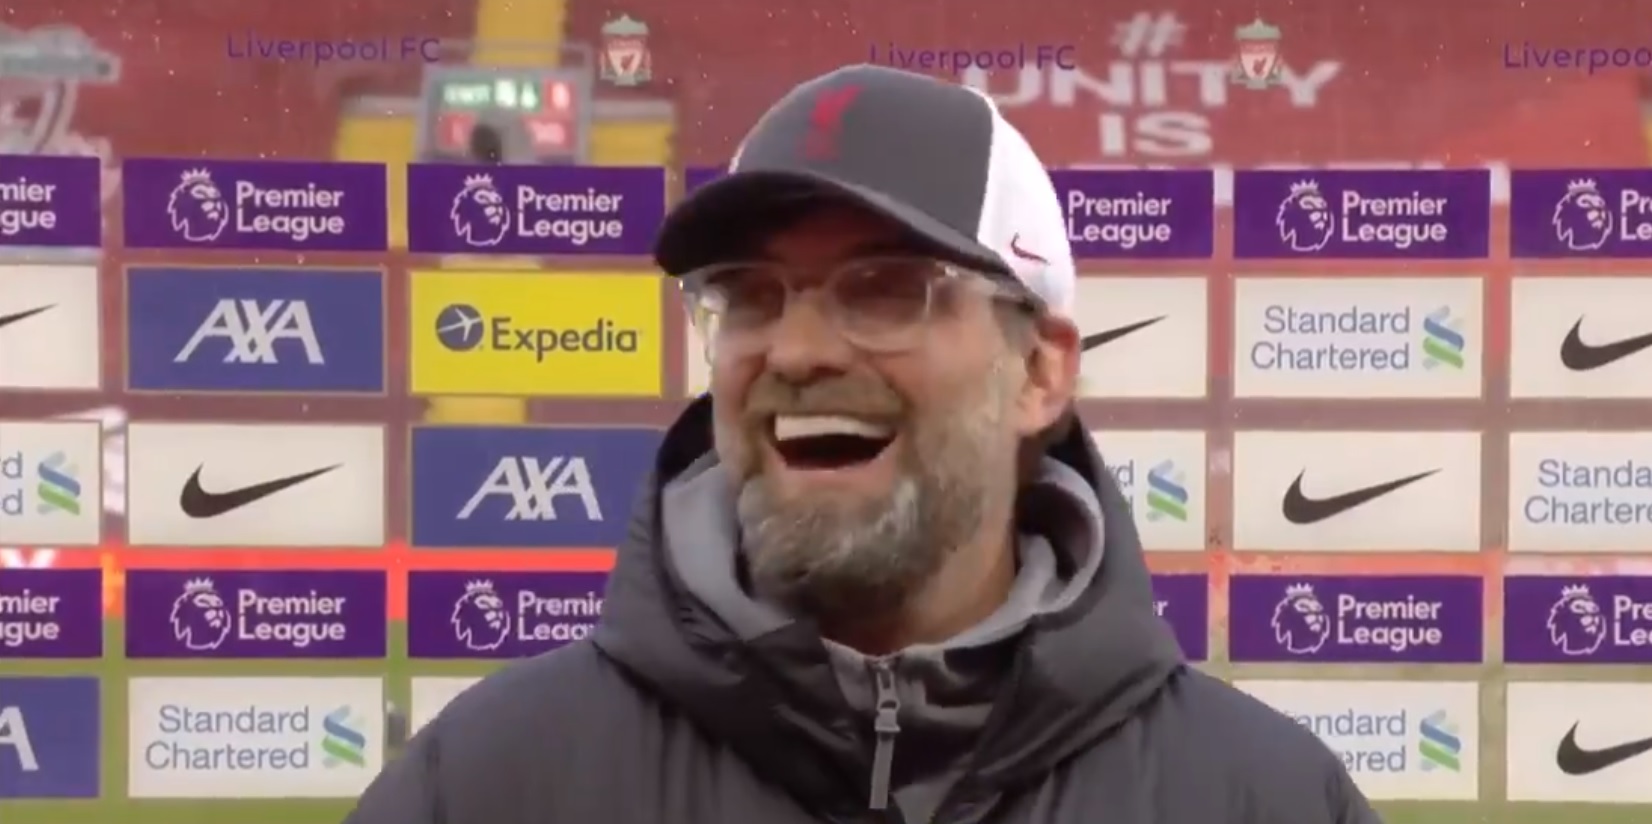 (Video) Klopp laughs when told who Ancelotti has on the bench: “Carlo the poker face!”